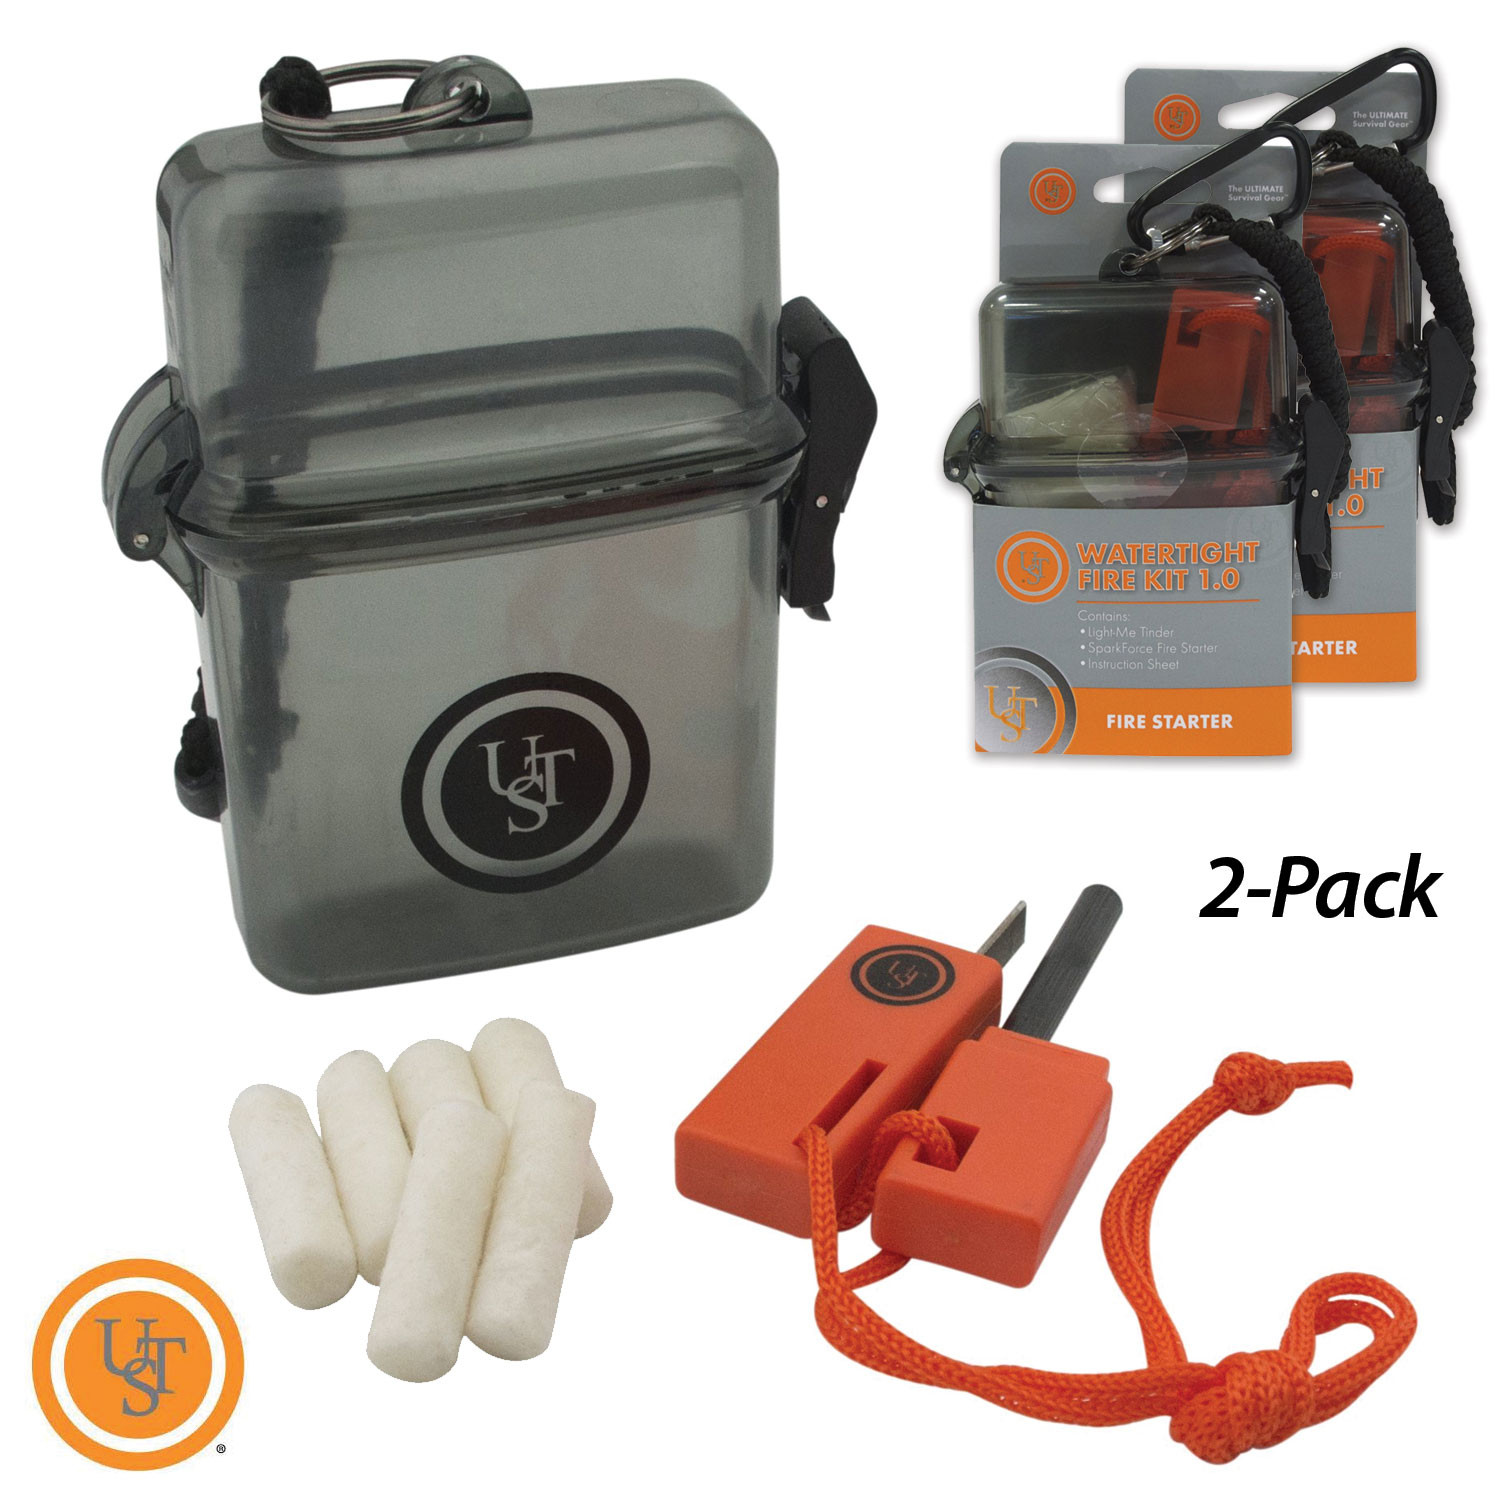 2-Pack: UST Ultimate Survival Technologies Watertight Fire Kit 1.0 $9.99 + Free Shipping